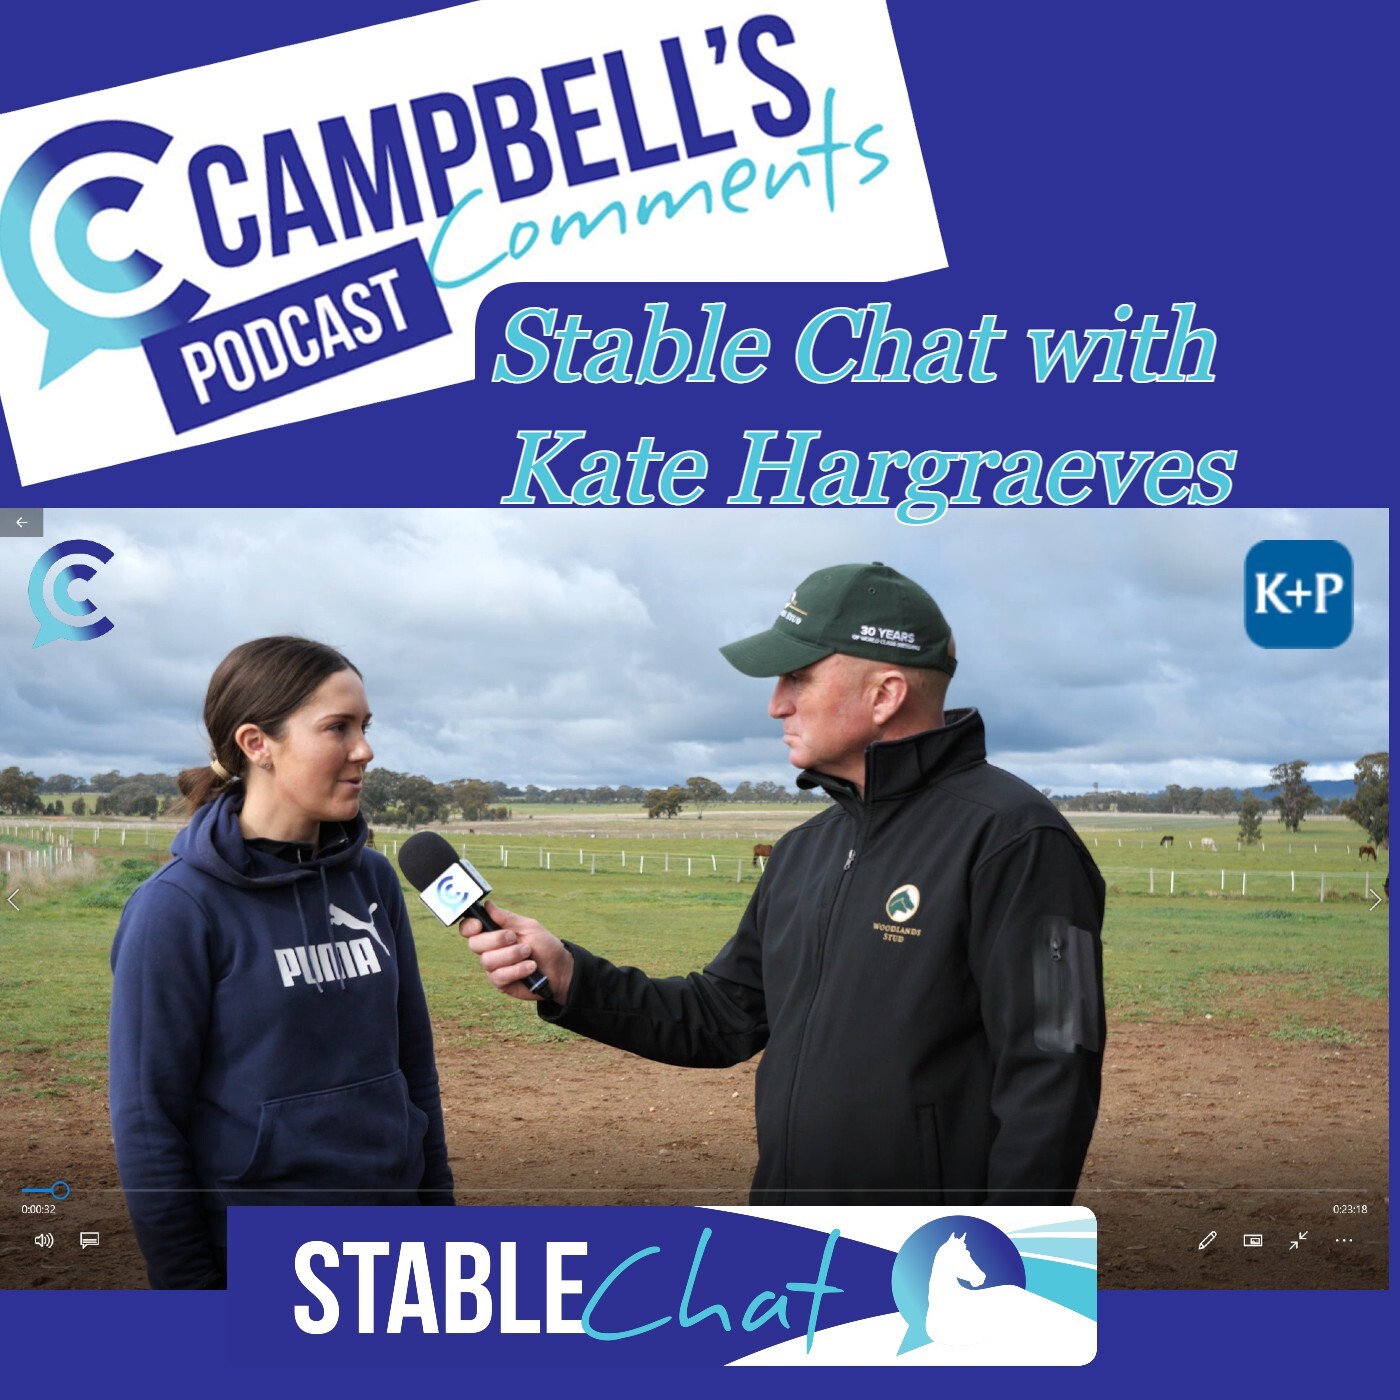 You are currently viewing 155: Stable Chat with Kate Hargreaves Racing.